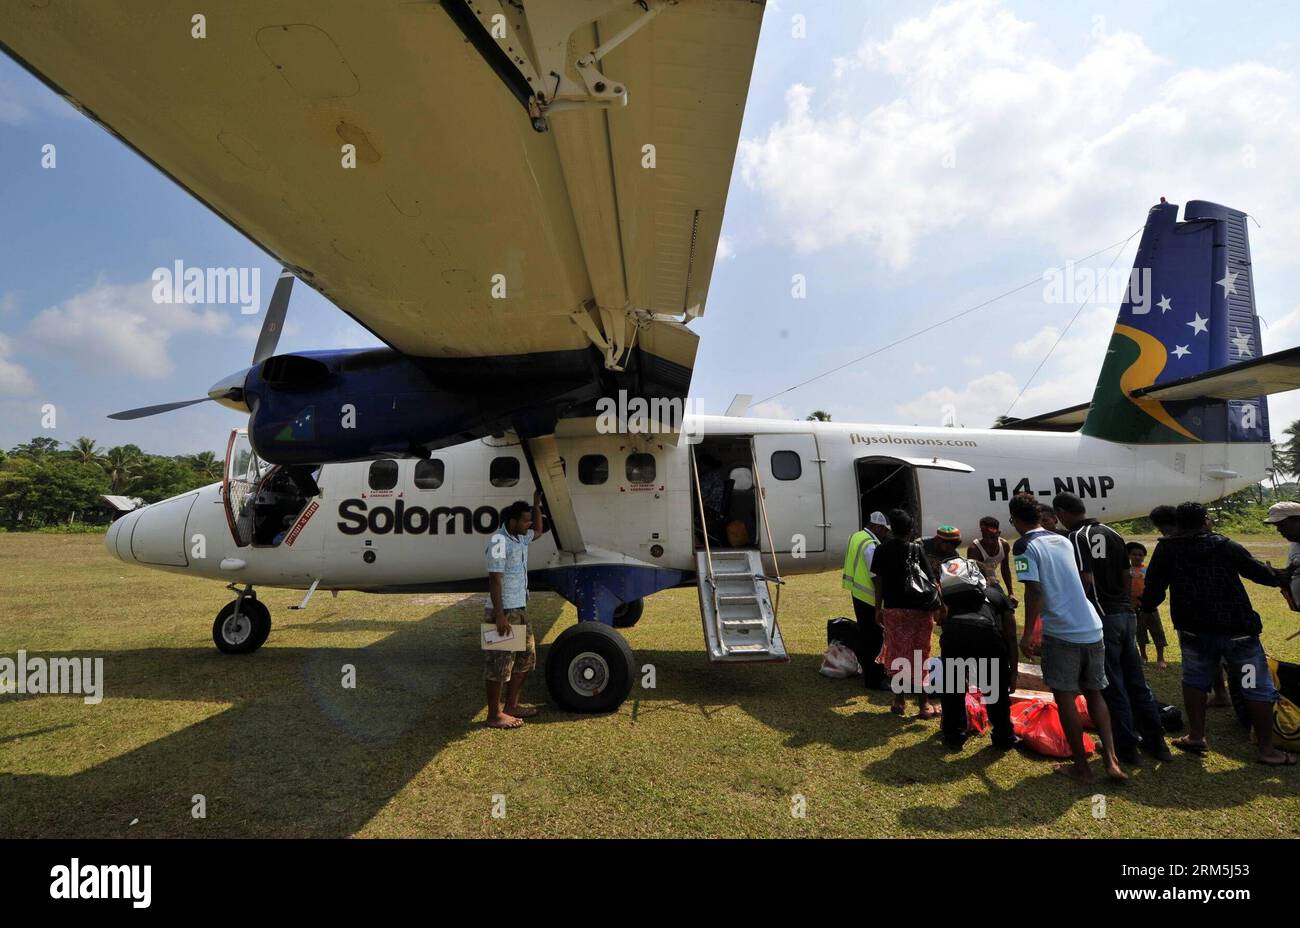 Bildnummer: 60668794  Datum: 02.11.2013  Copyright: imago/Xinhua Passengers get their luggages from a Twin Otter lightplane which has served 30 years at the airport of Rennell in Solomon Islands, Nov. 2, 2013. The Solomon Airlines owns a history of more than 50 years. The DHC 8-102 , Twin Otter and Islander are three kinds of vintage lightplanes serving for national flights which can respectively carry 36, 16 and 9 passengers. Most of these planes have served more than ten years or even dozens of years. (Xinhua/Gao Jianjun) SOLOMON ISLANDS-SOLOMON AIRLINES-VINTAGE LIGHTPLANES PUBLICATIONxNOTxI Stock Photo